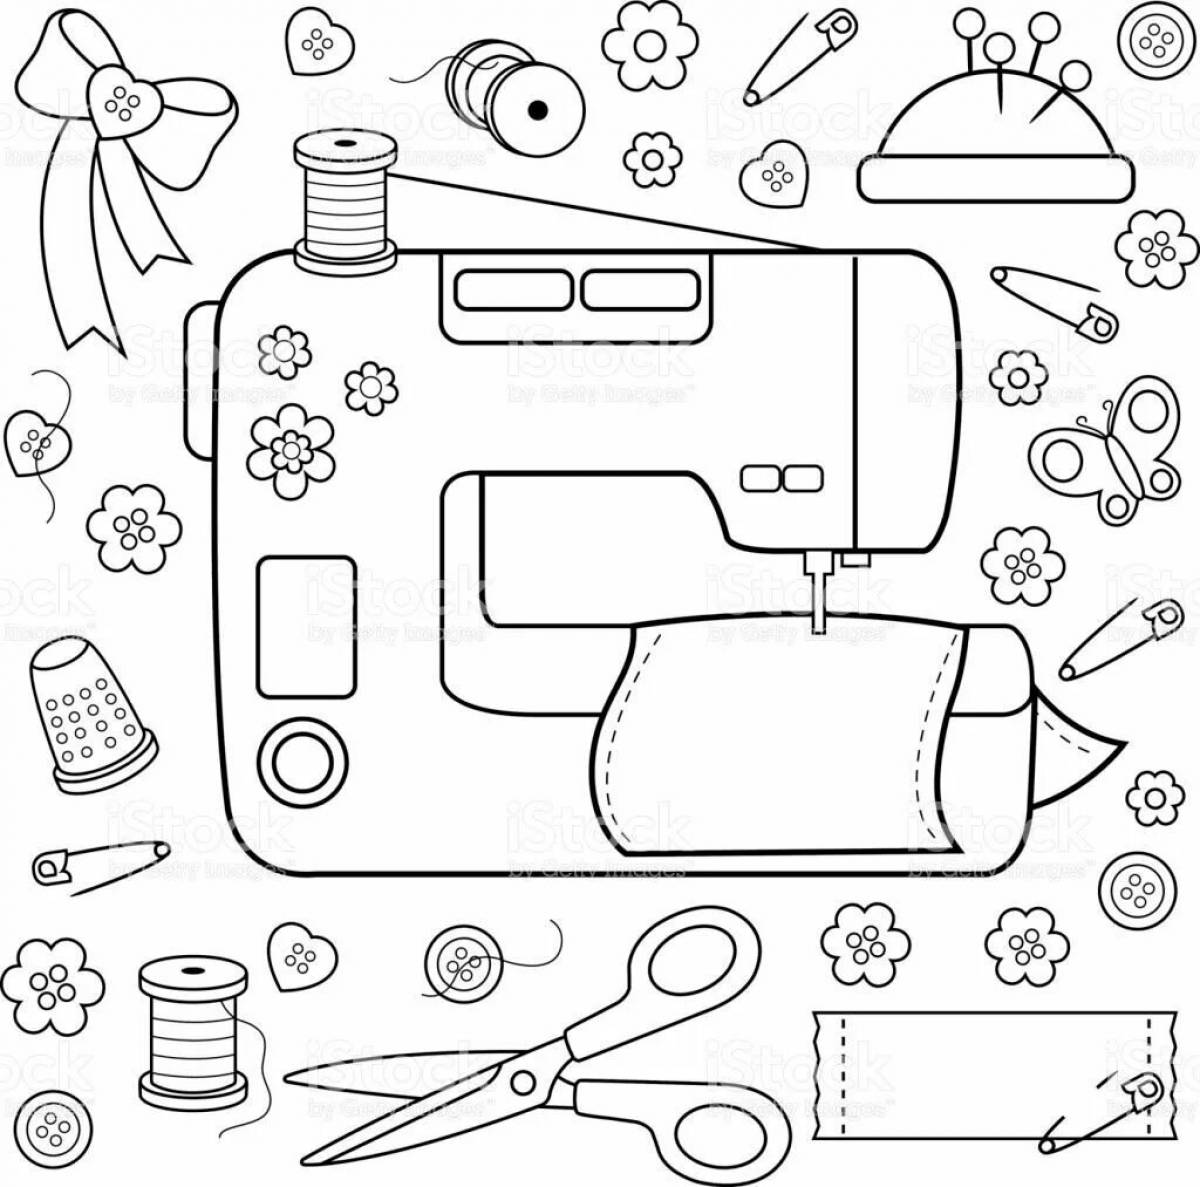 Adorable seamstress coloring book for babies